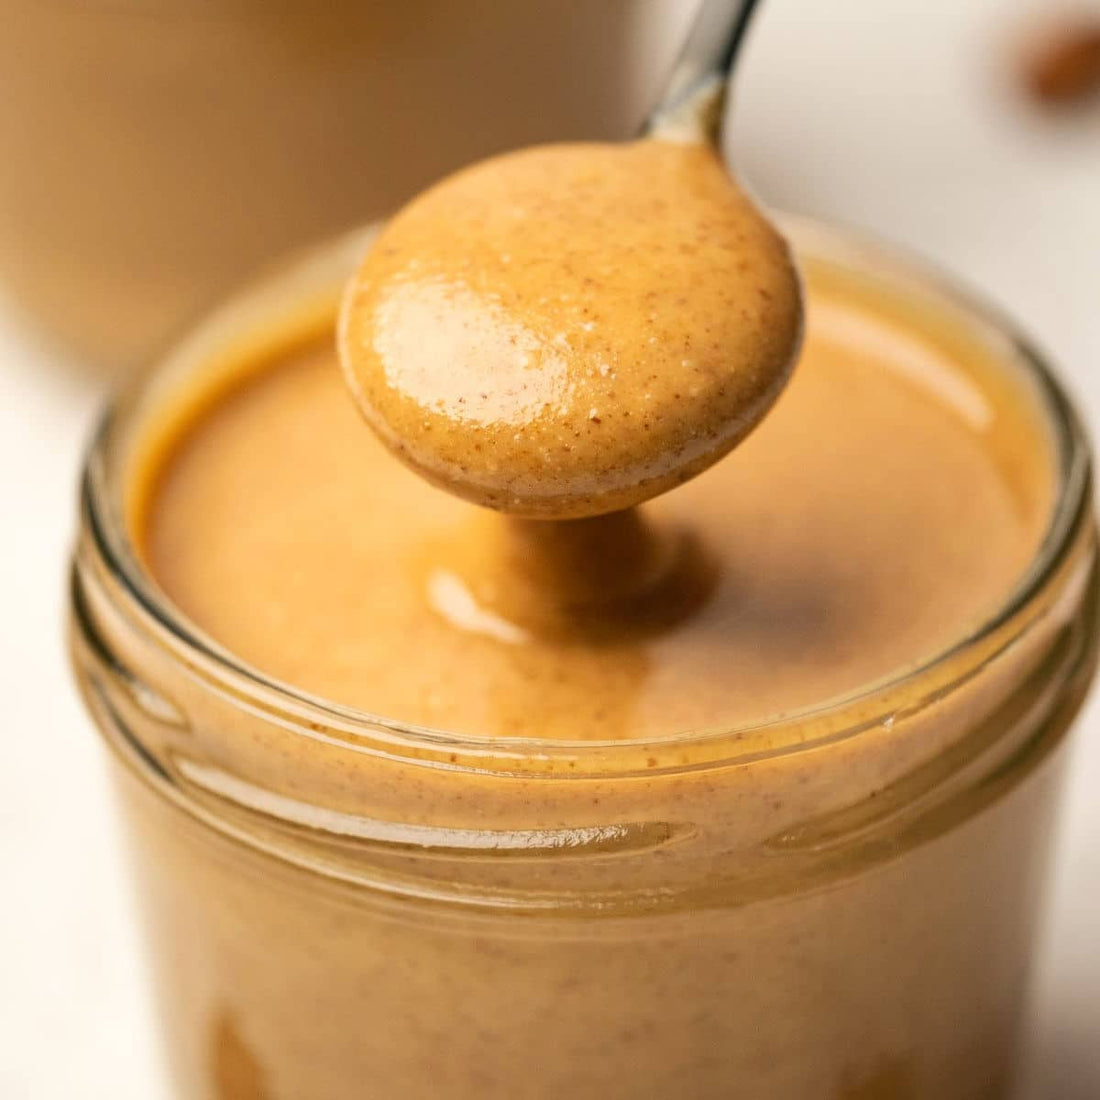 Why You Should Switch from Peanut Butter to Almond Butter